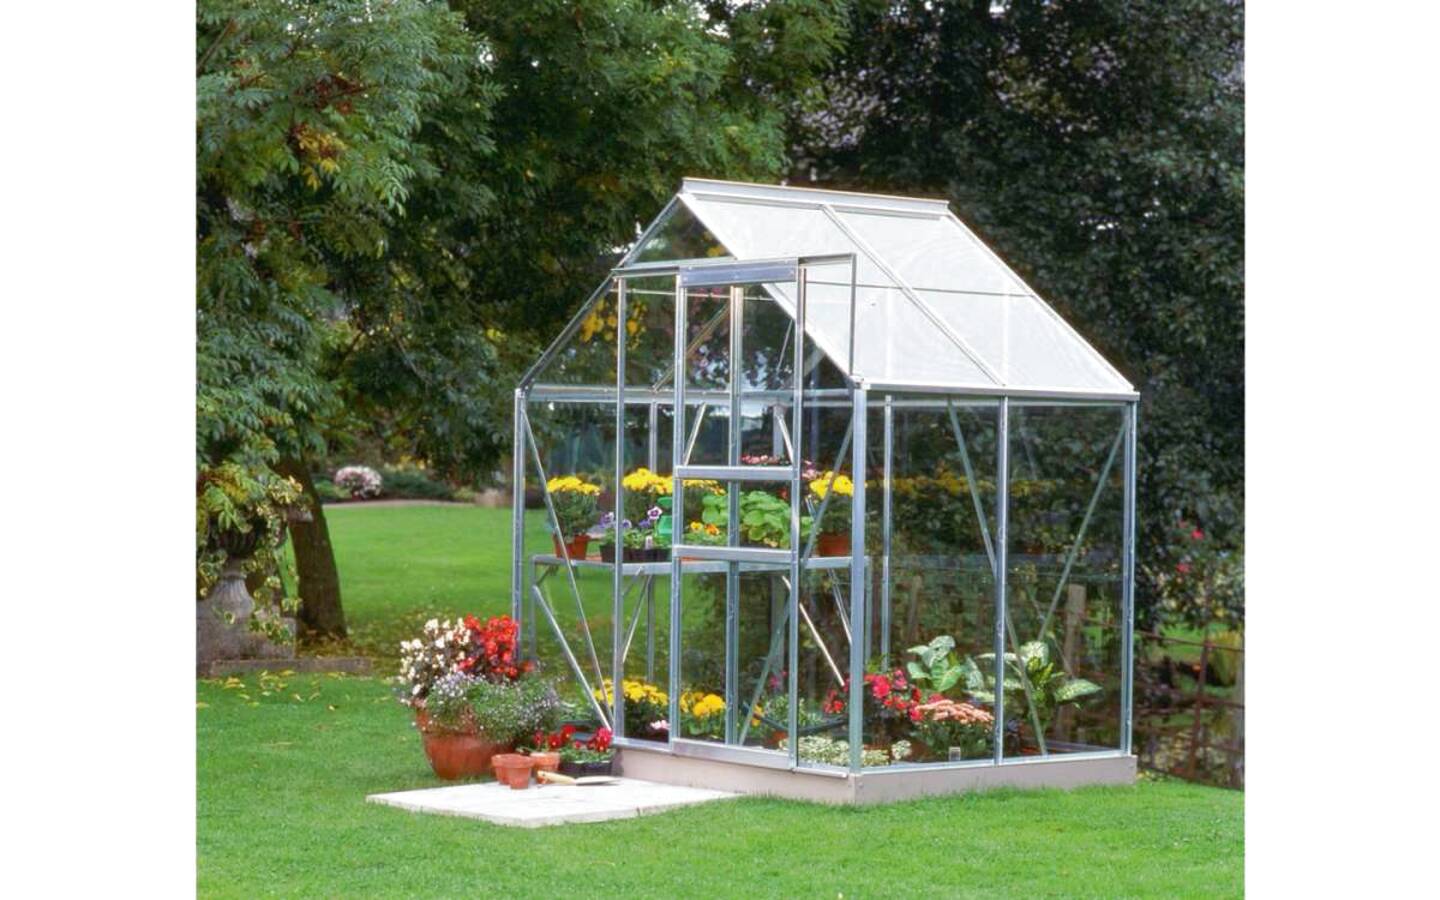 6Ft X 4Ft Greenhouse for sale in UK - 59 used 6Ft X 4Ft Greenhouses